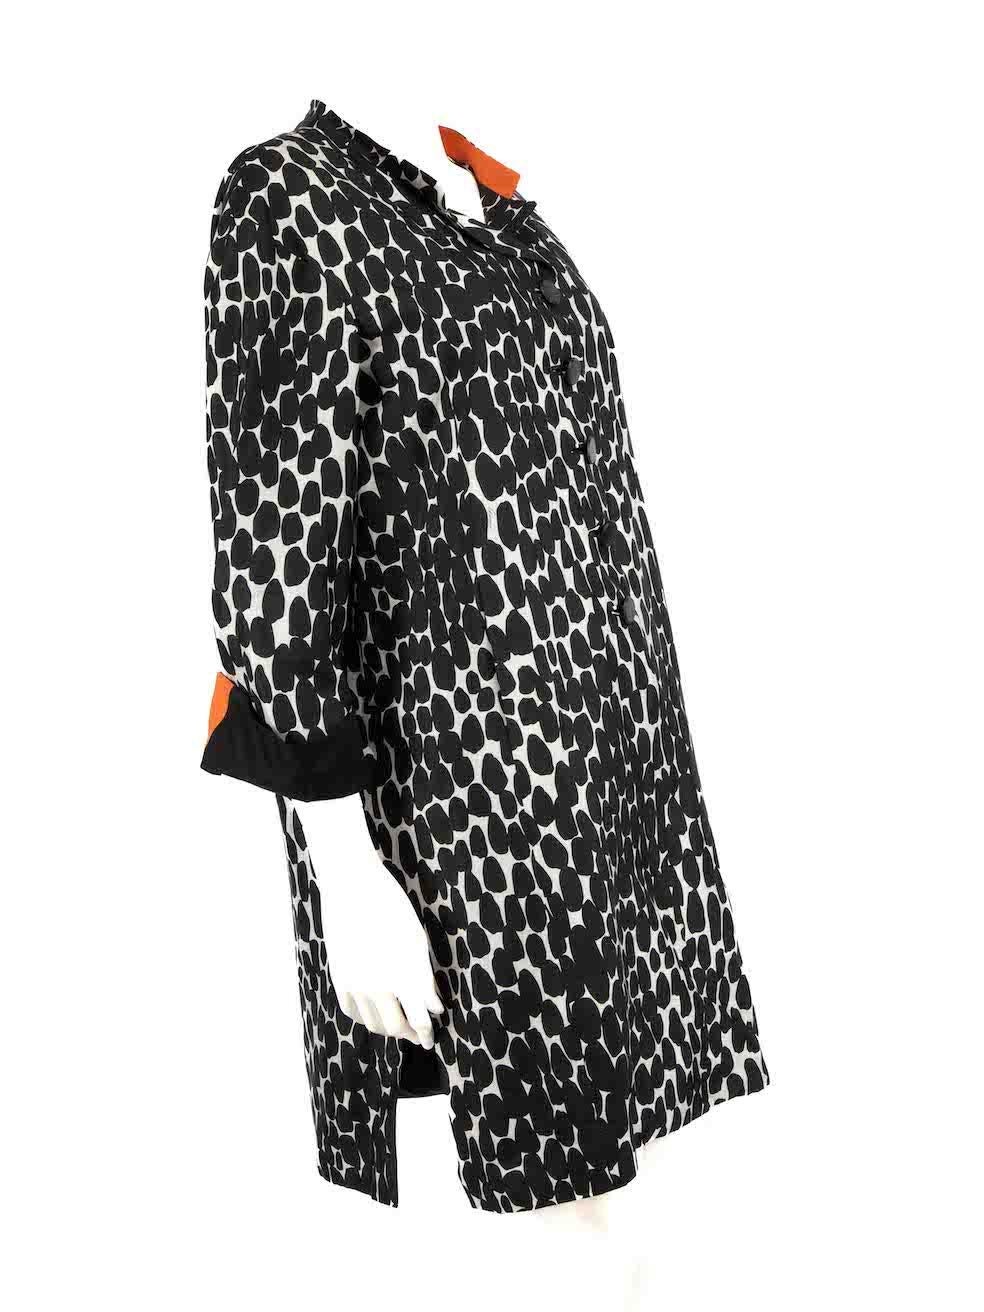 CONDITION is Very good. Minimal wear to coat is evident. Minimal wear to the cuffs with faint discoloured marks and the belt is missing on this used Gucci designer resale item.
 
 
 
 Details
 
 
 Black
 
 Silk
 
 Mid length coat
 
 Spot printed
 
